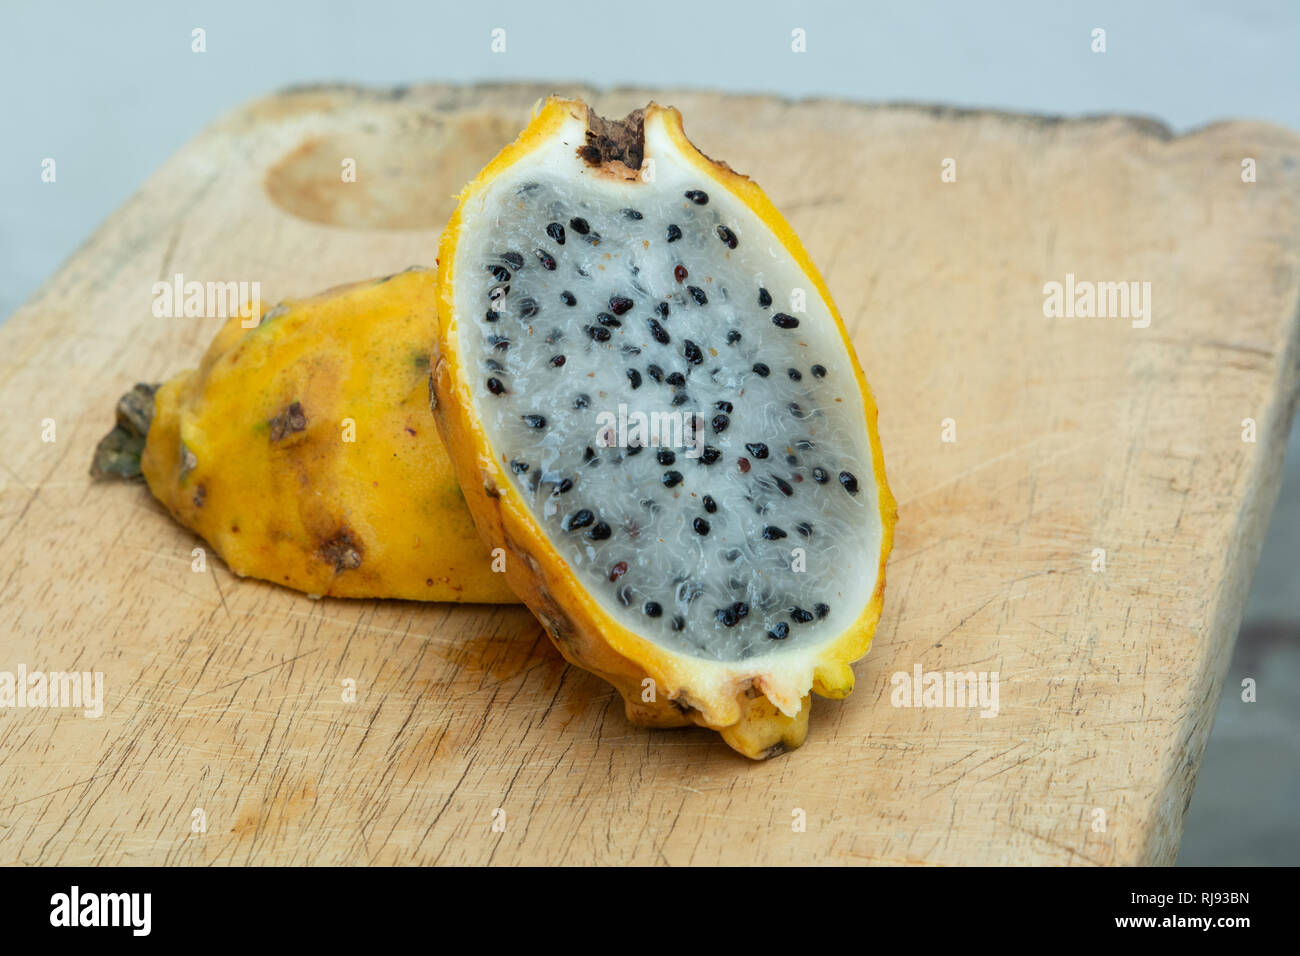 Yellow Dragon Fruit Or Pitaya Pitahaya Cut Open To Show Interior Flesh Stock Photo Alamy,Unsanded Grout Mapei Grout Colors